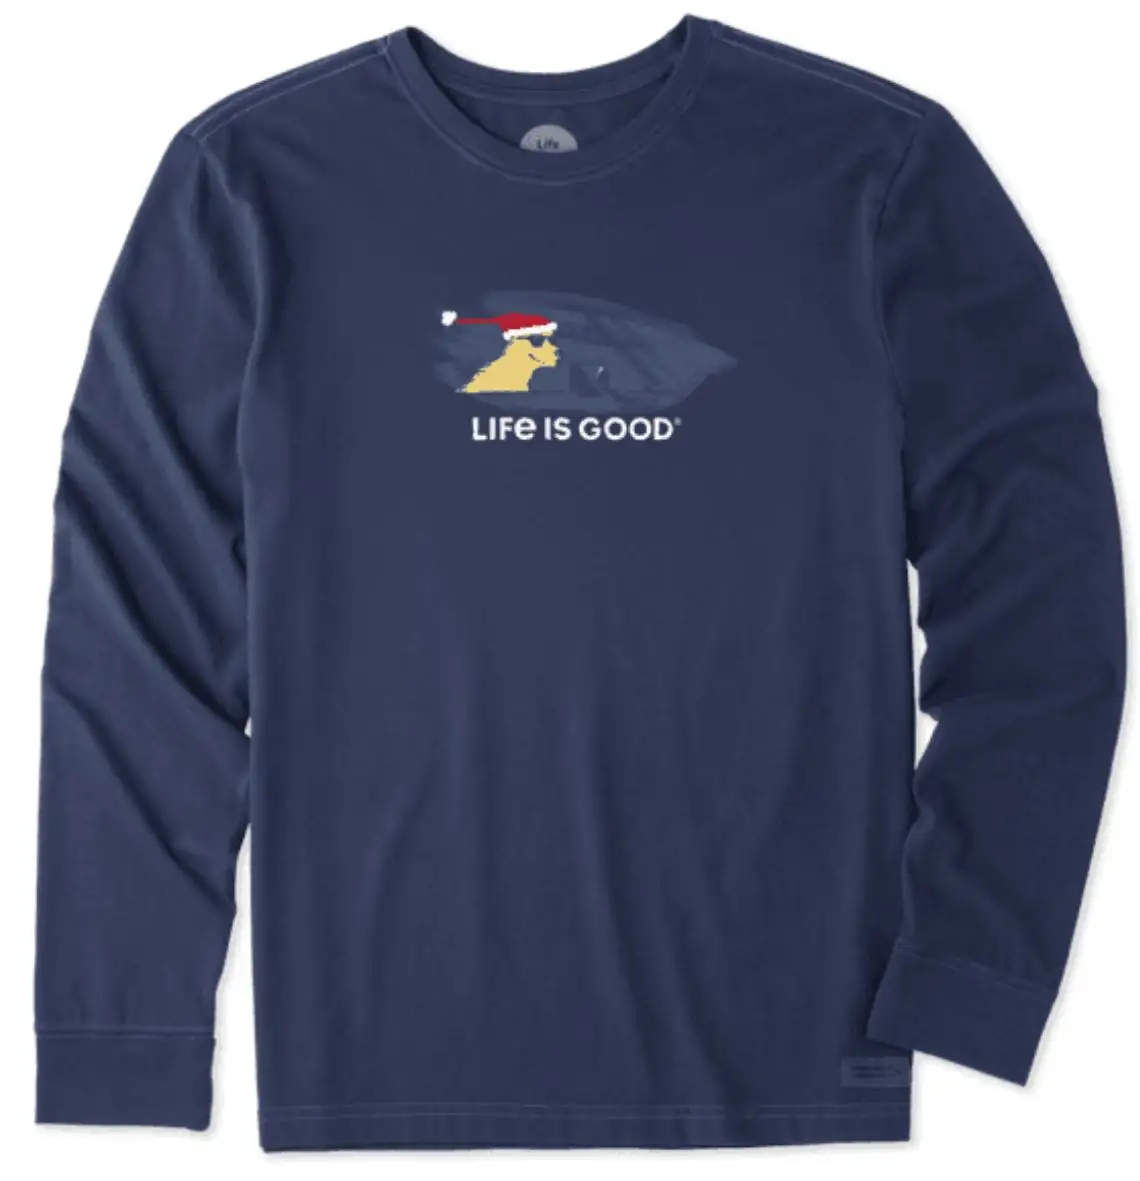 Life Is Good Flash Sale: Up to 50% off + Extra 20% off Sale items